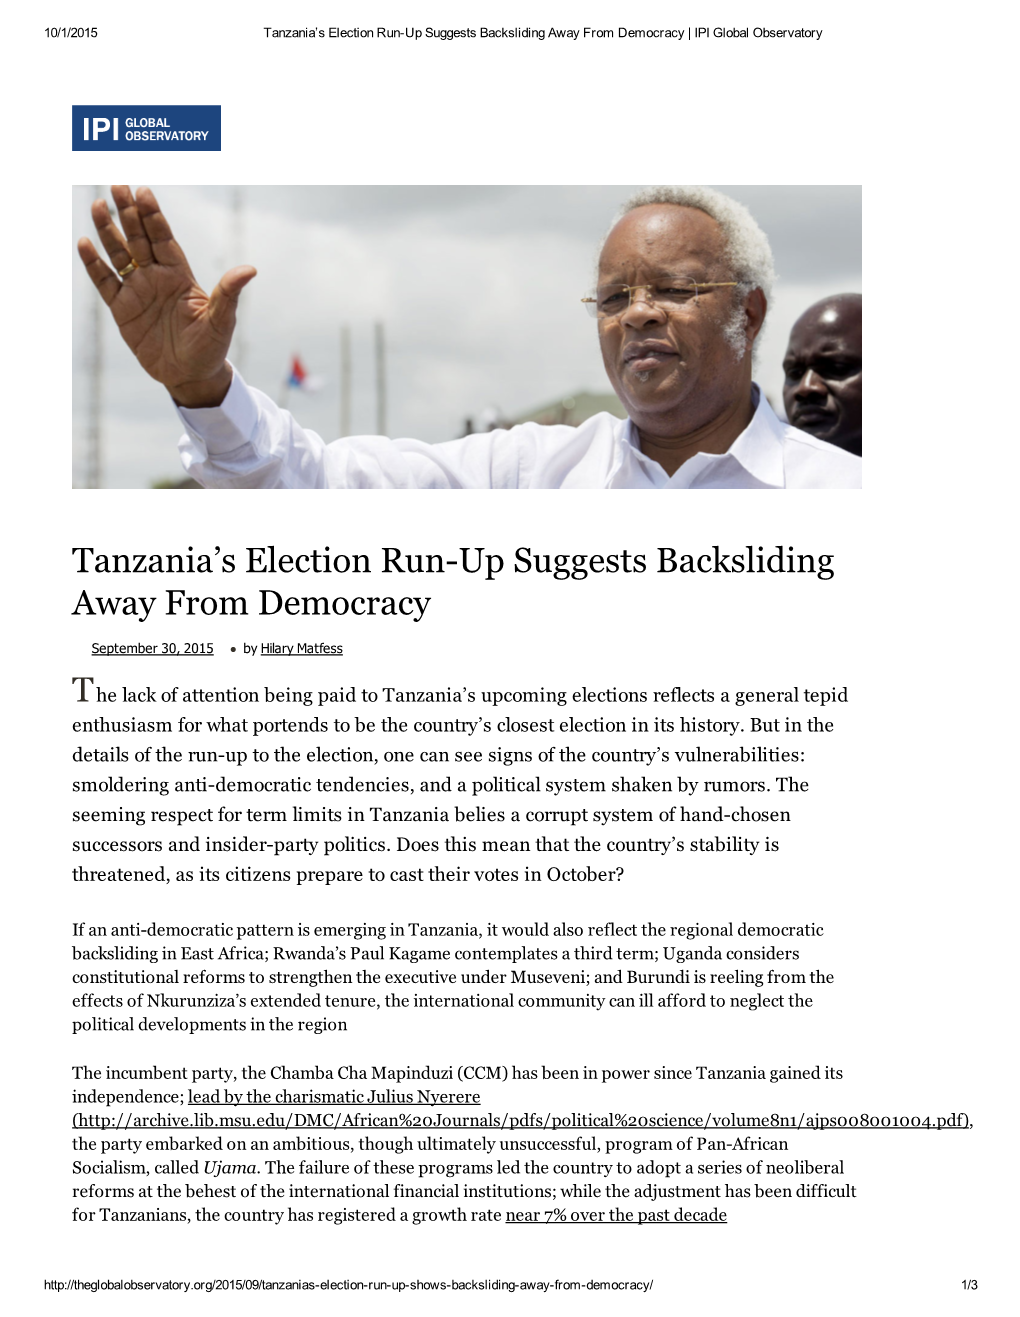 Tanzania's Election Runup Suggests Backsliding Away from Democracy